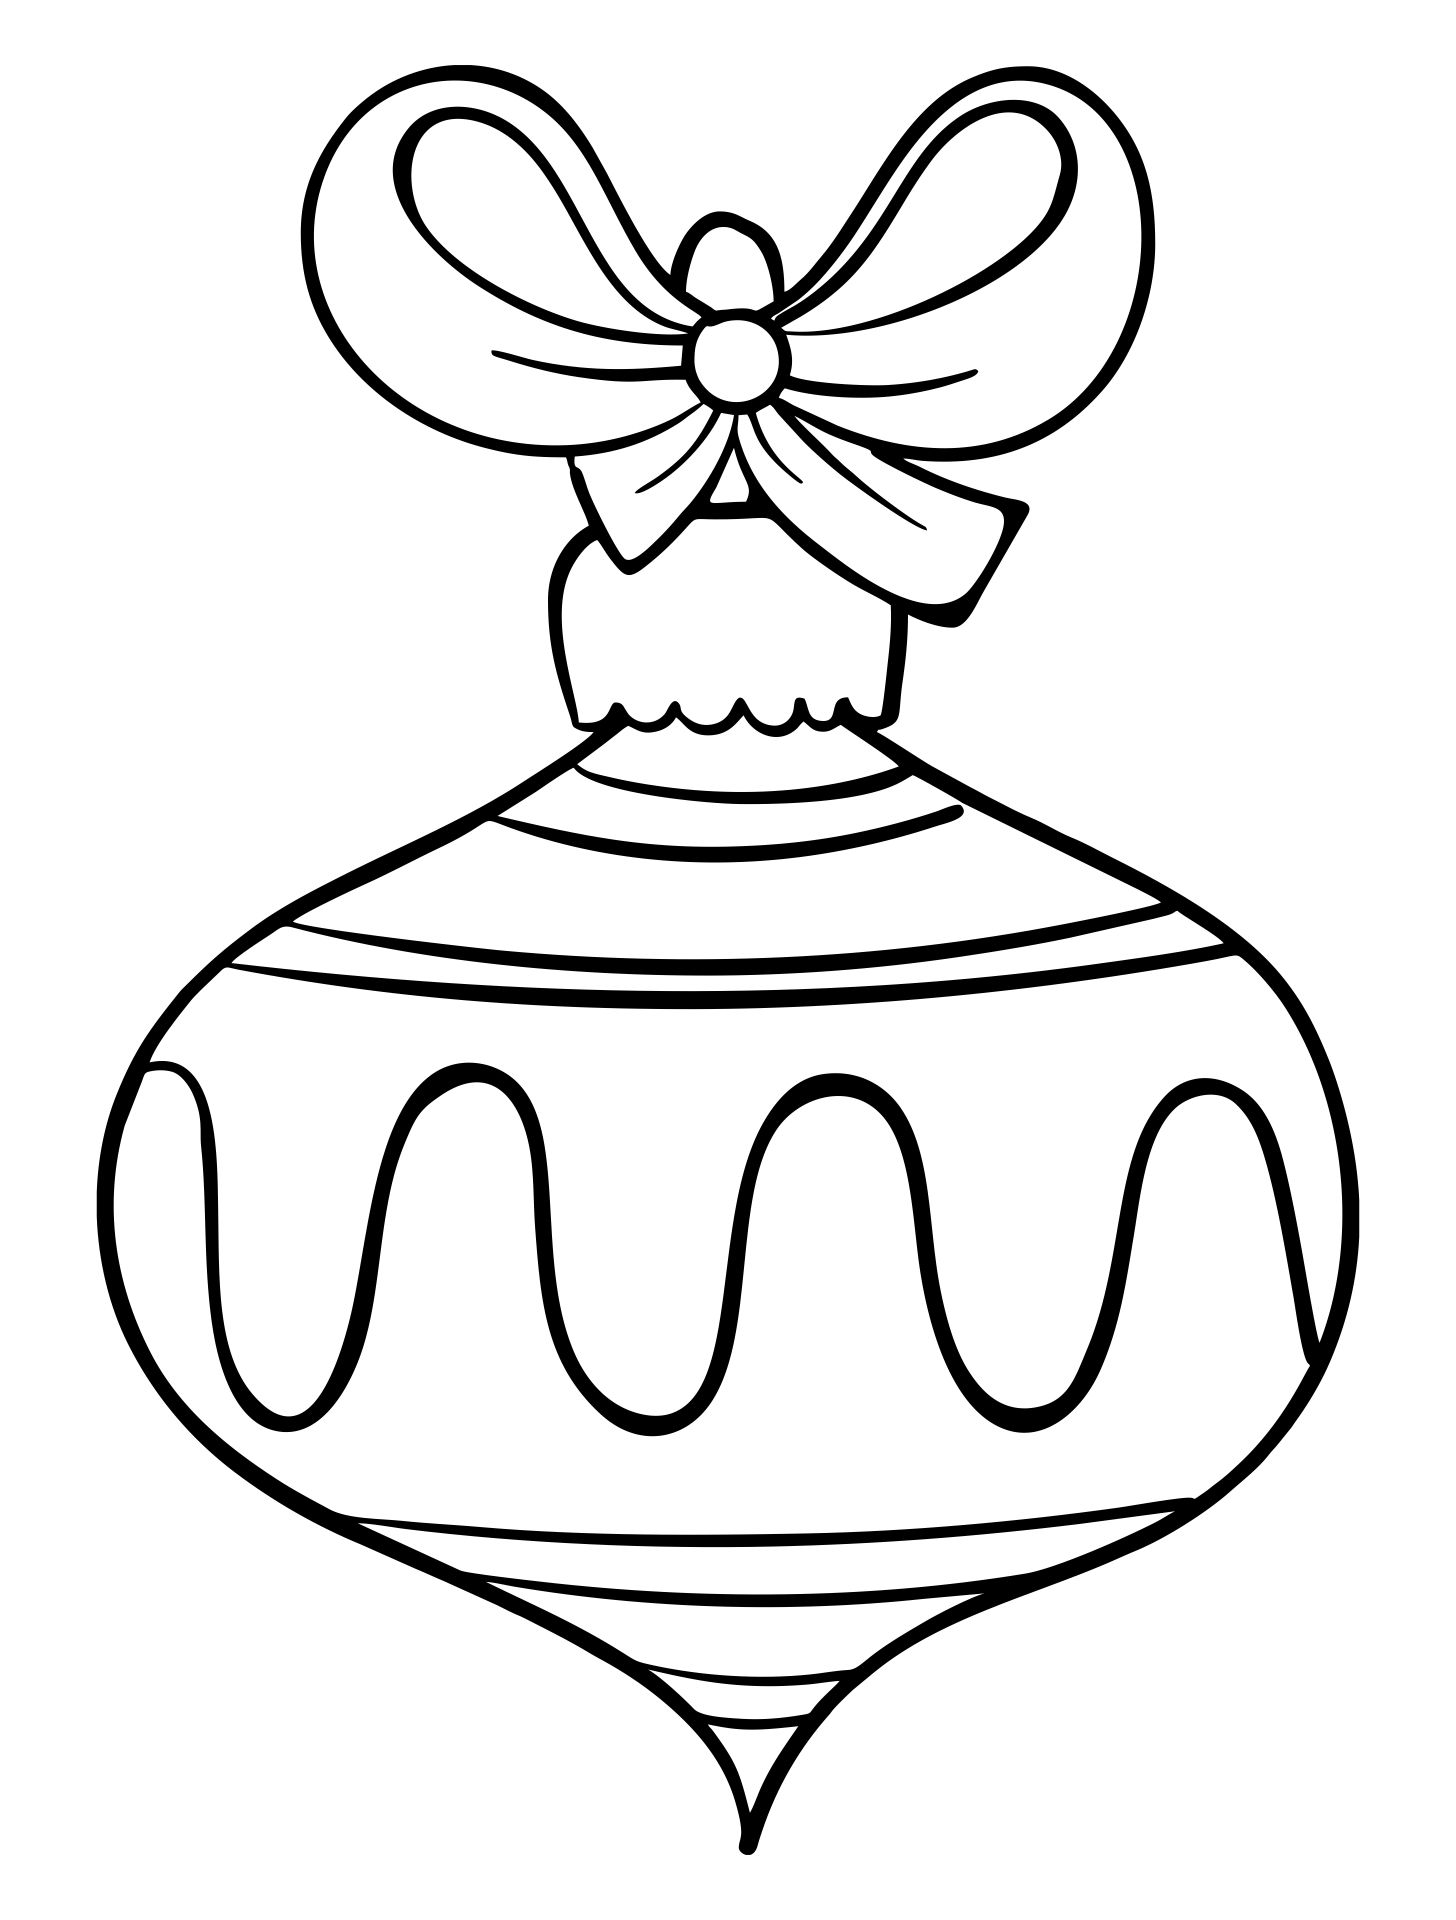 15 Best Free Christmas Printable Ornament Coloring Pages - printablee.com